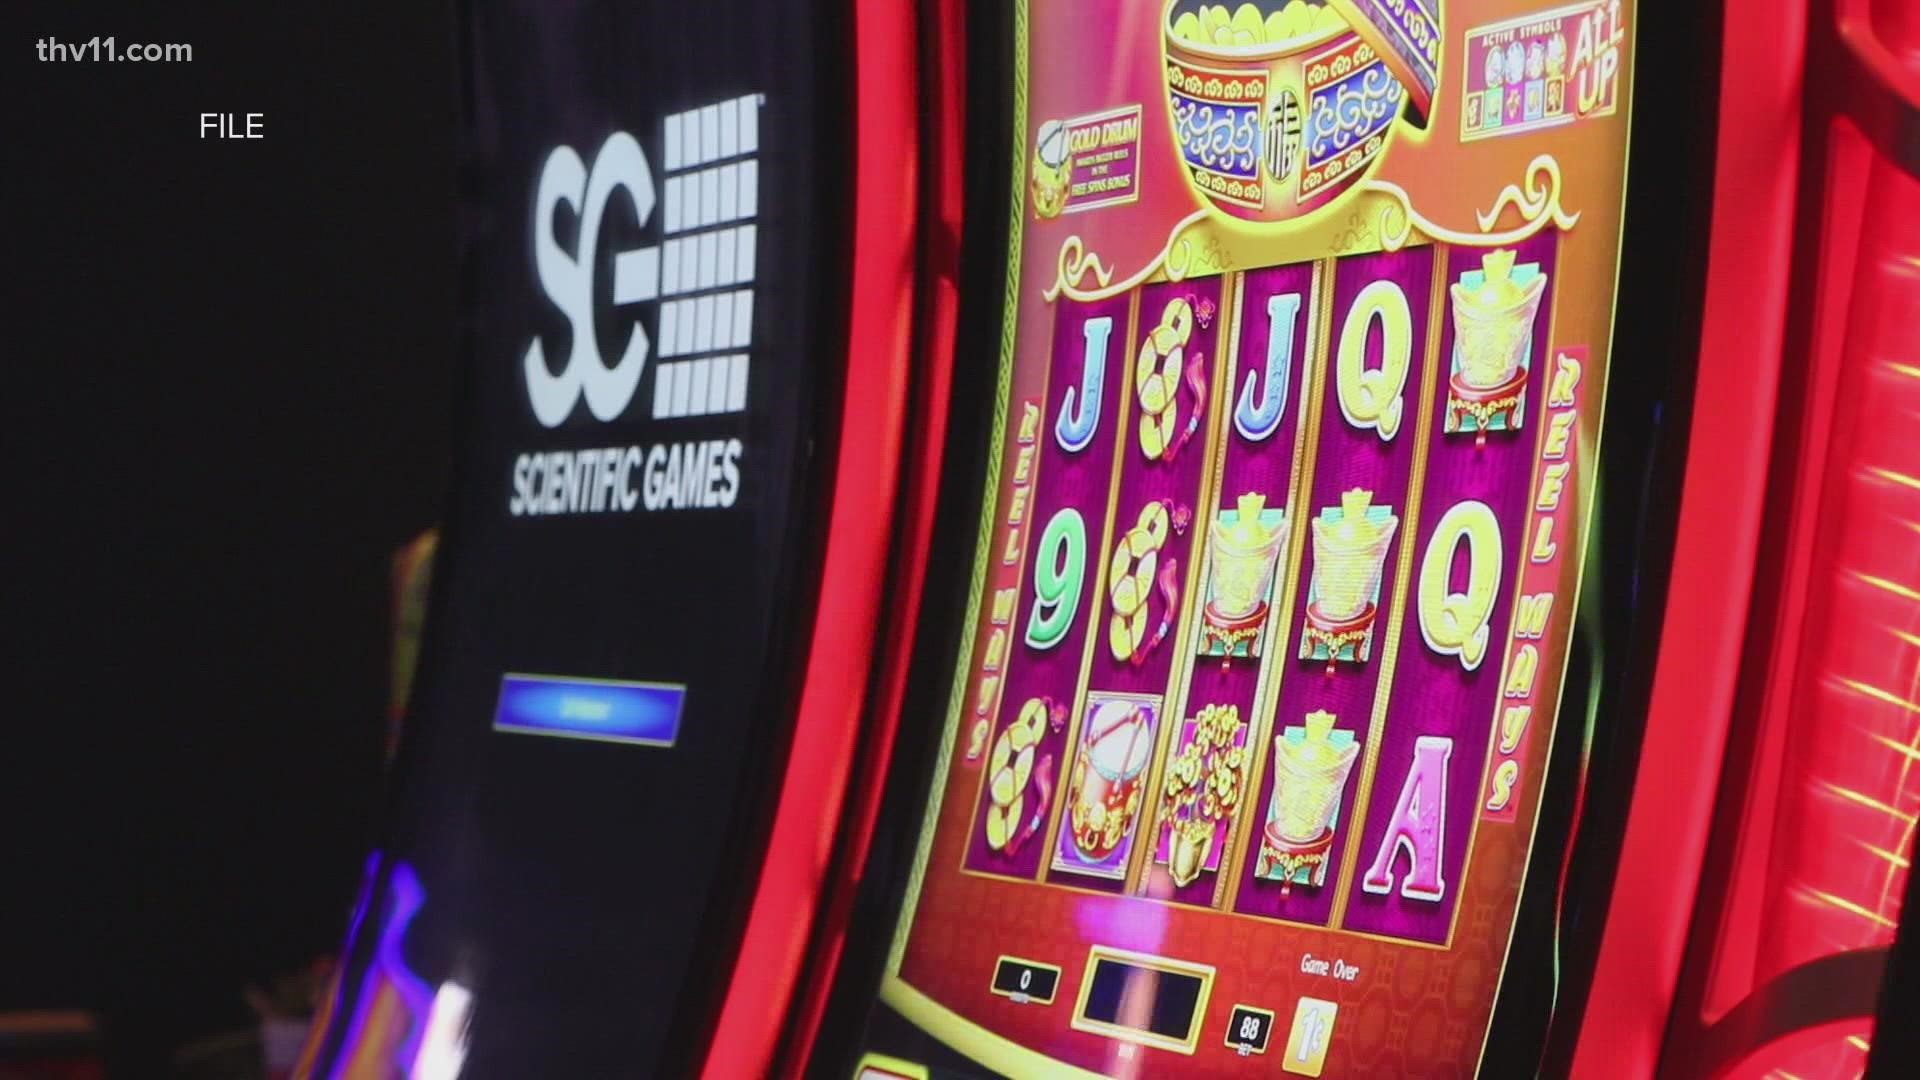 Saracen Casino is partnering with International Gaming Technology to connect machines in Pine Bluff to other machines in locations like Las Vegas and Atlantic City.